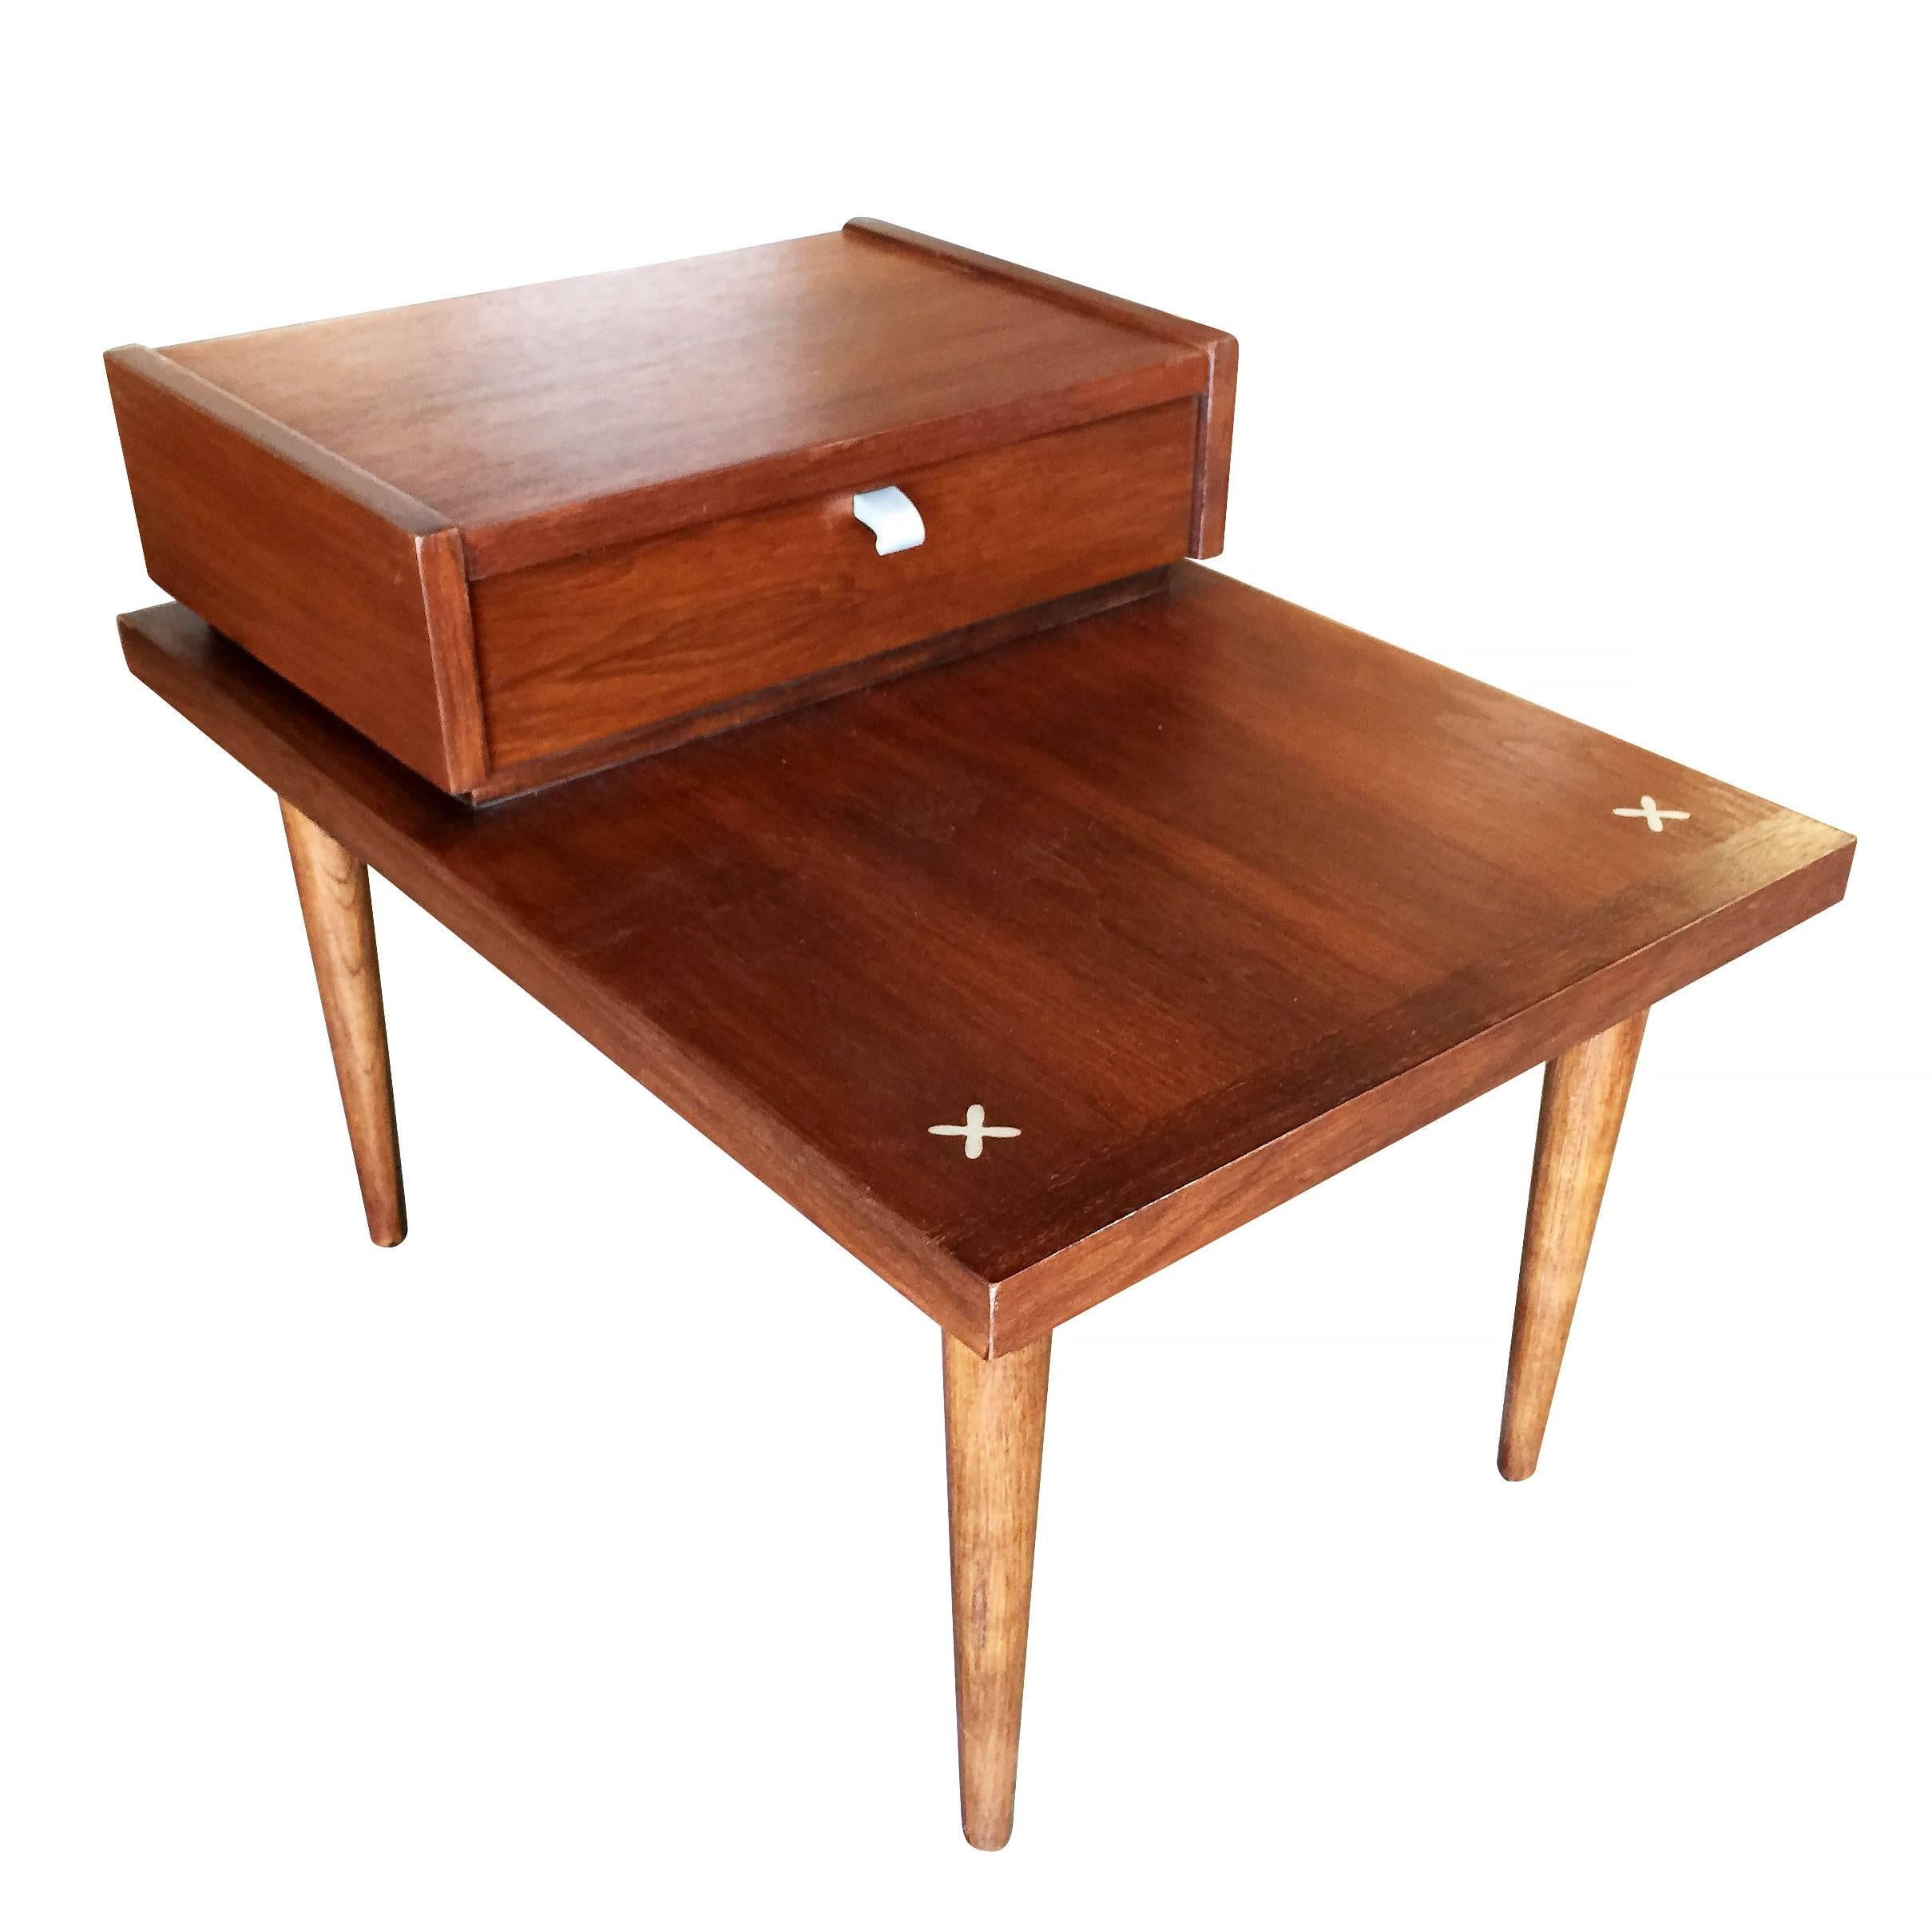 American of Martinsville two-tier bedside tables in the style of Geroge Nelson with top pull-out drawer and X-shaped metal inlays, circa 1950.

Signed 